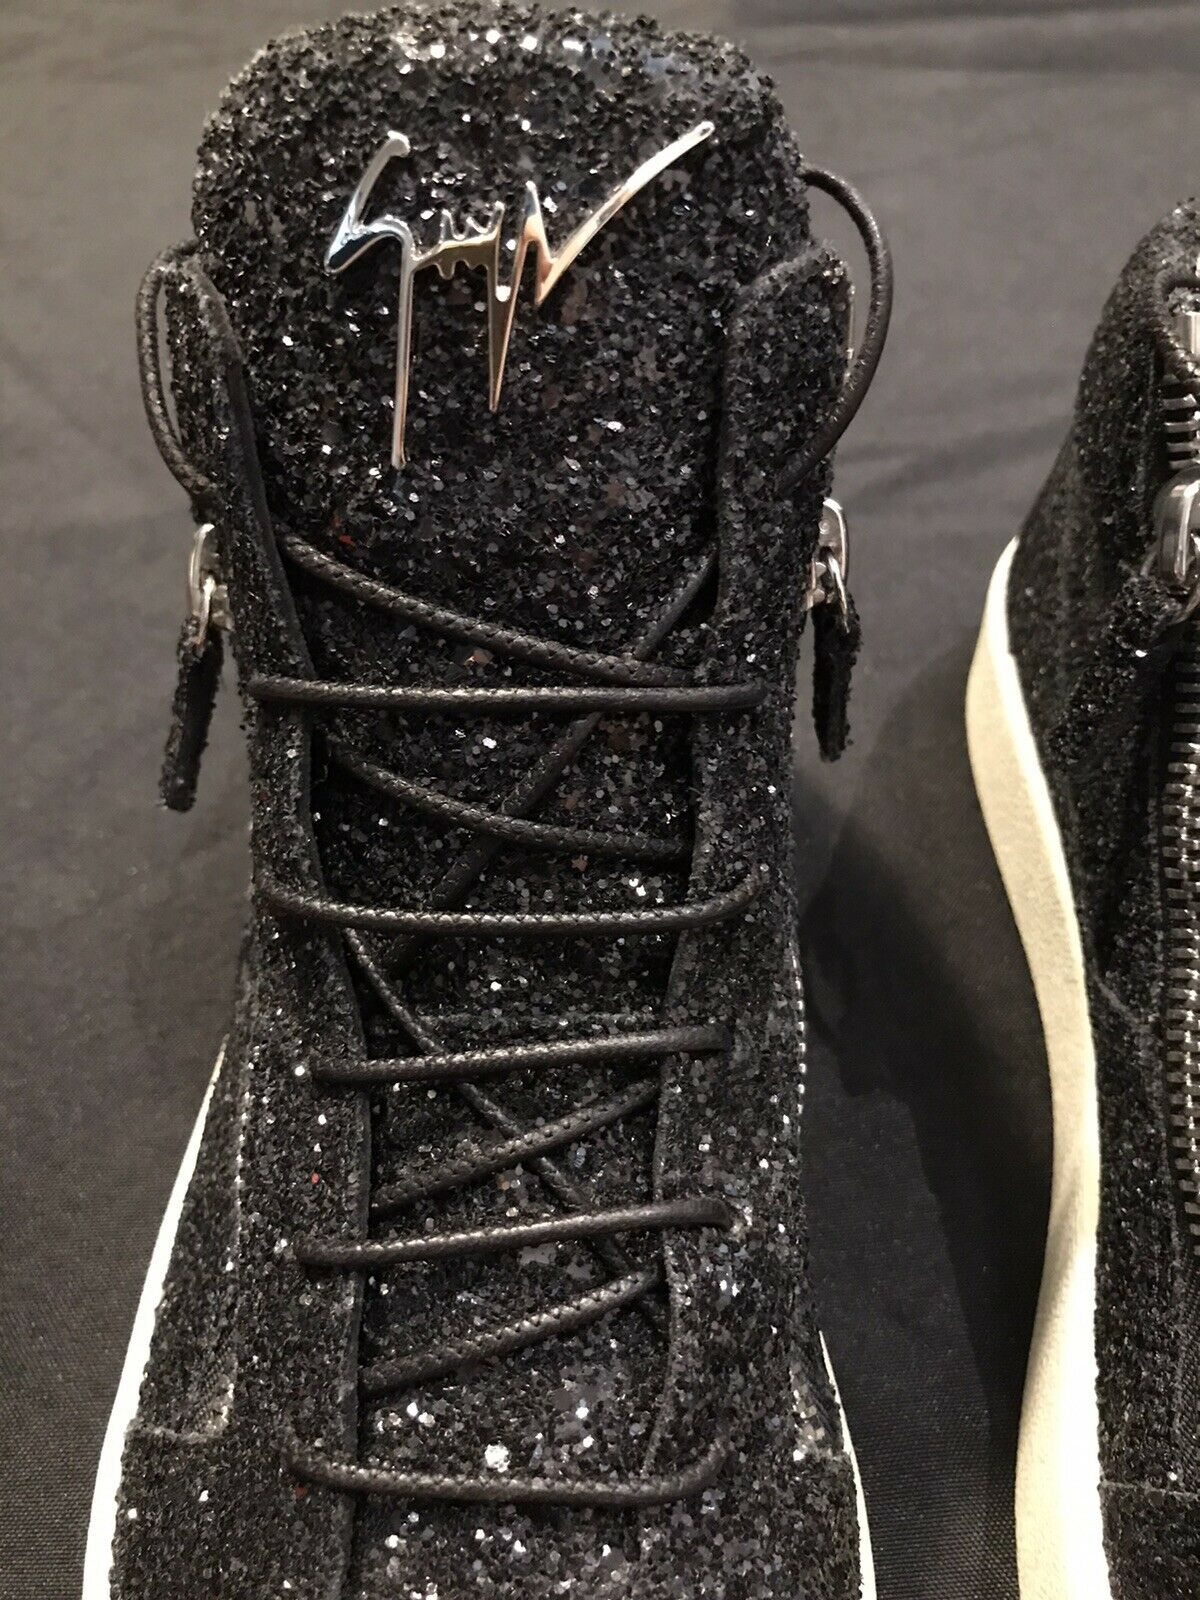 GIUSEPPE ZANOTTI BLACK KRISS GLITTER 45.5 FIT 12 SNEAKERS SHOES ALL AUTHENTIC